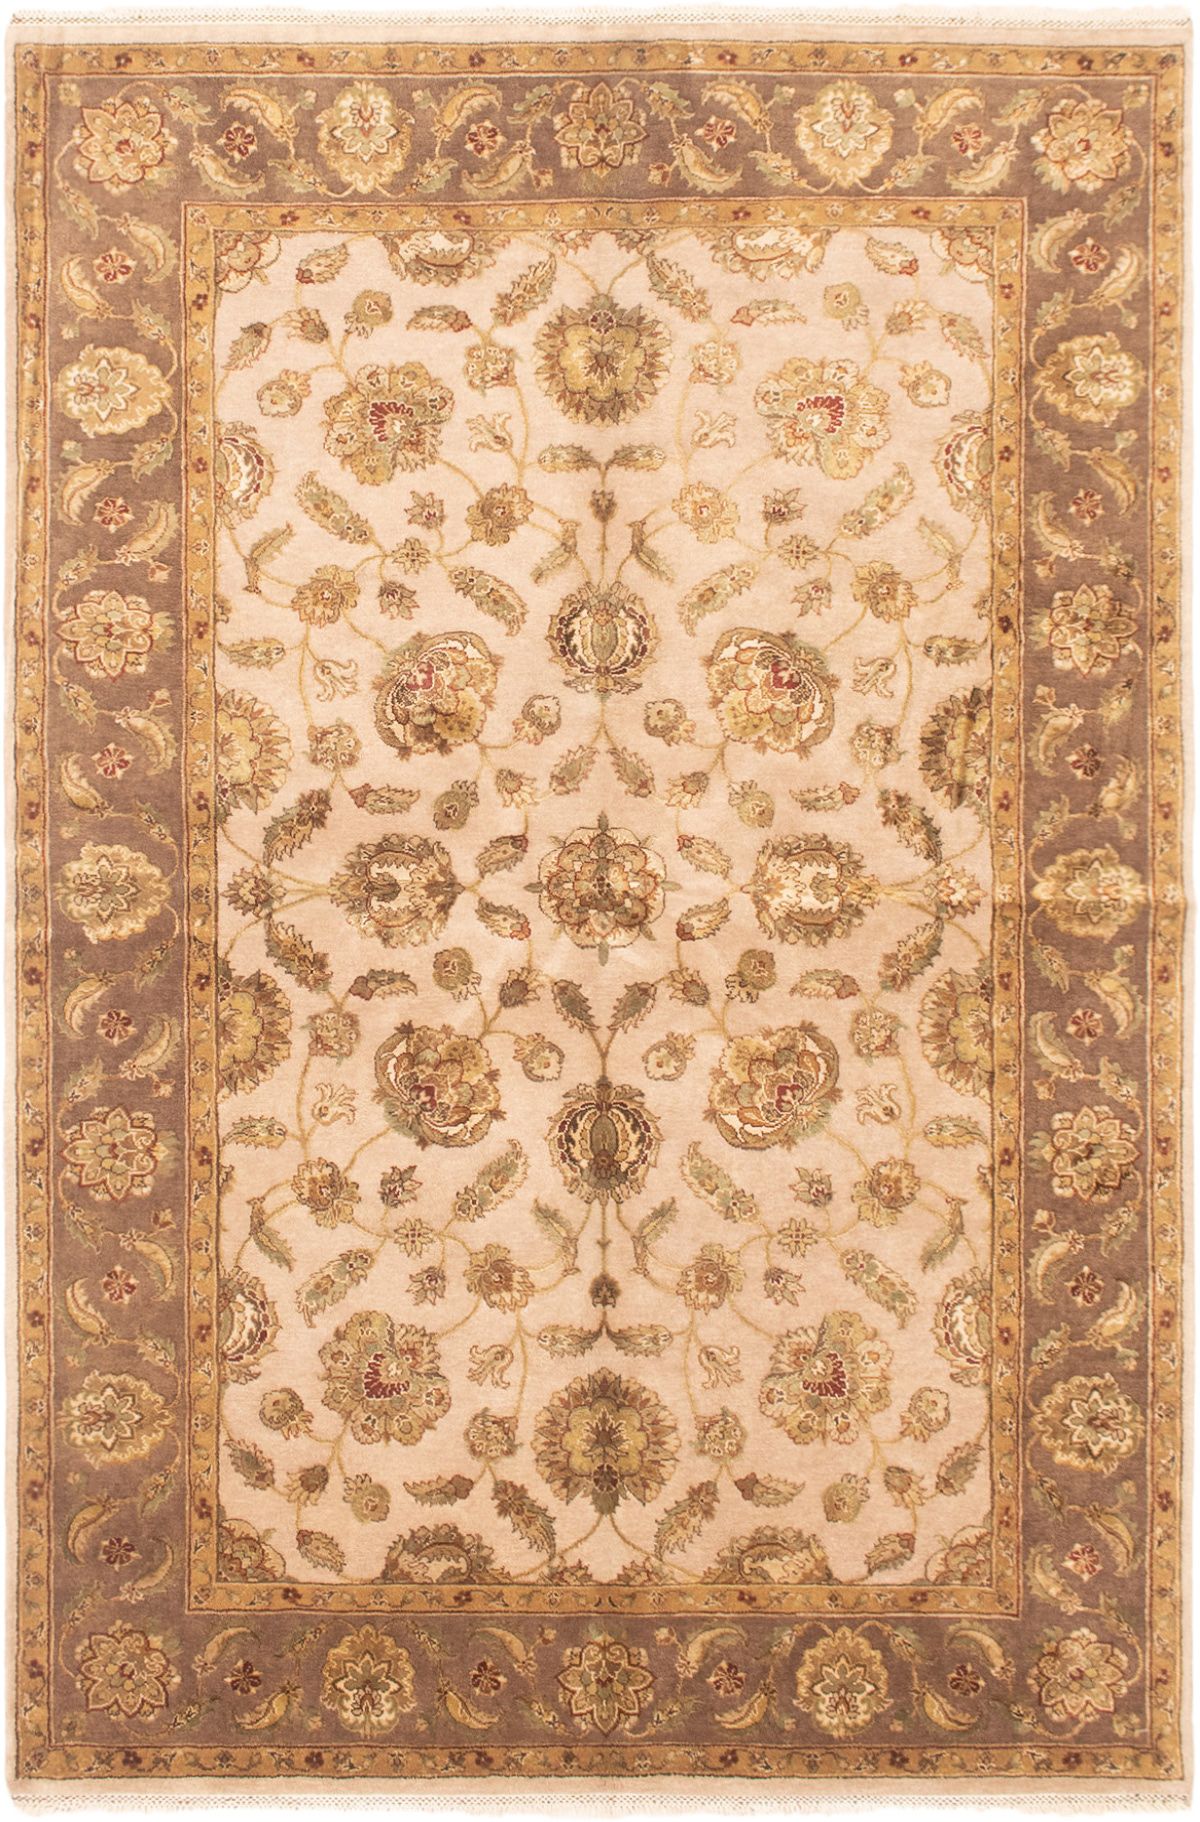 Hand-knotted Harrir Select Tan Wool/Silk Rug 5'11" x 8'11" Size: 5'11" x 8'11"  